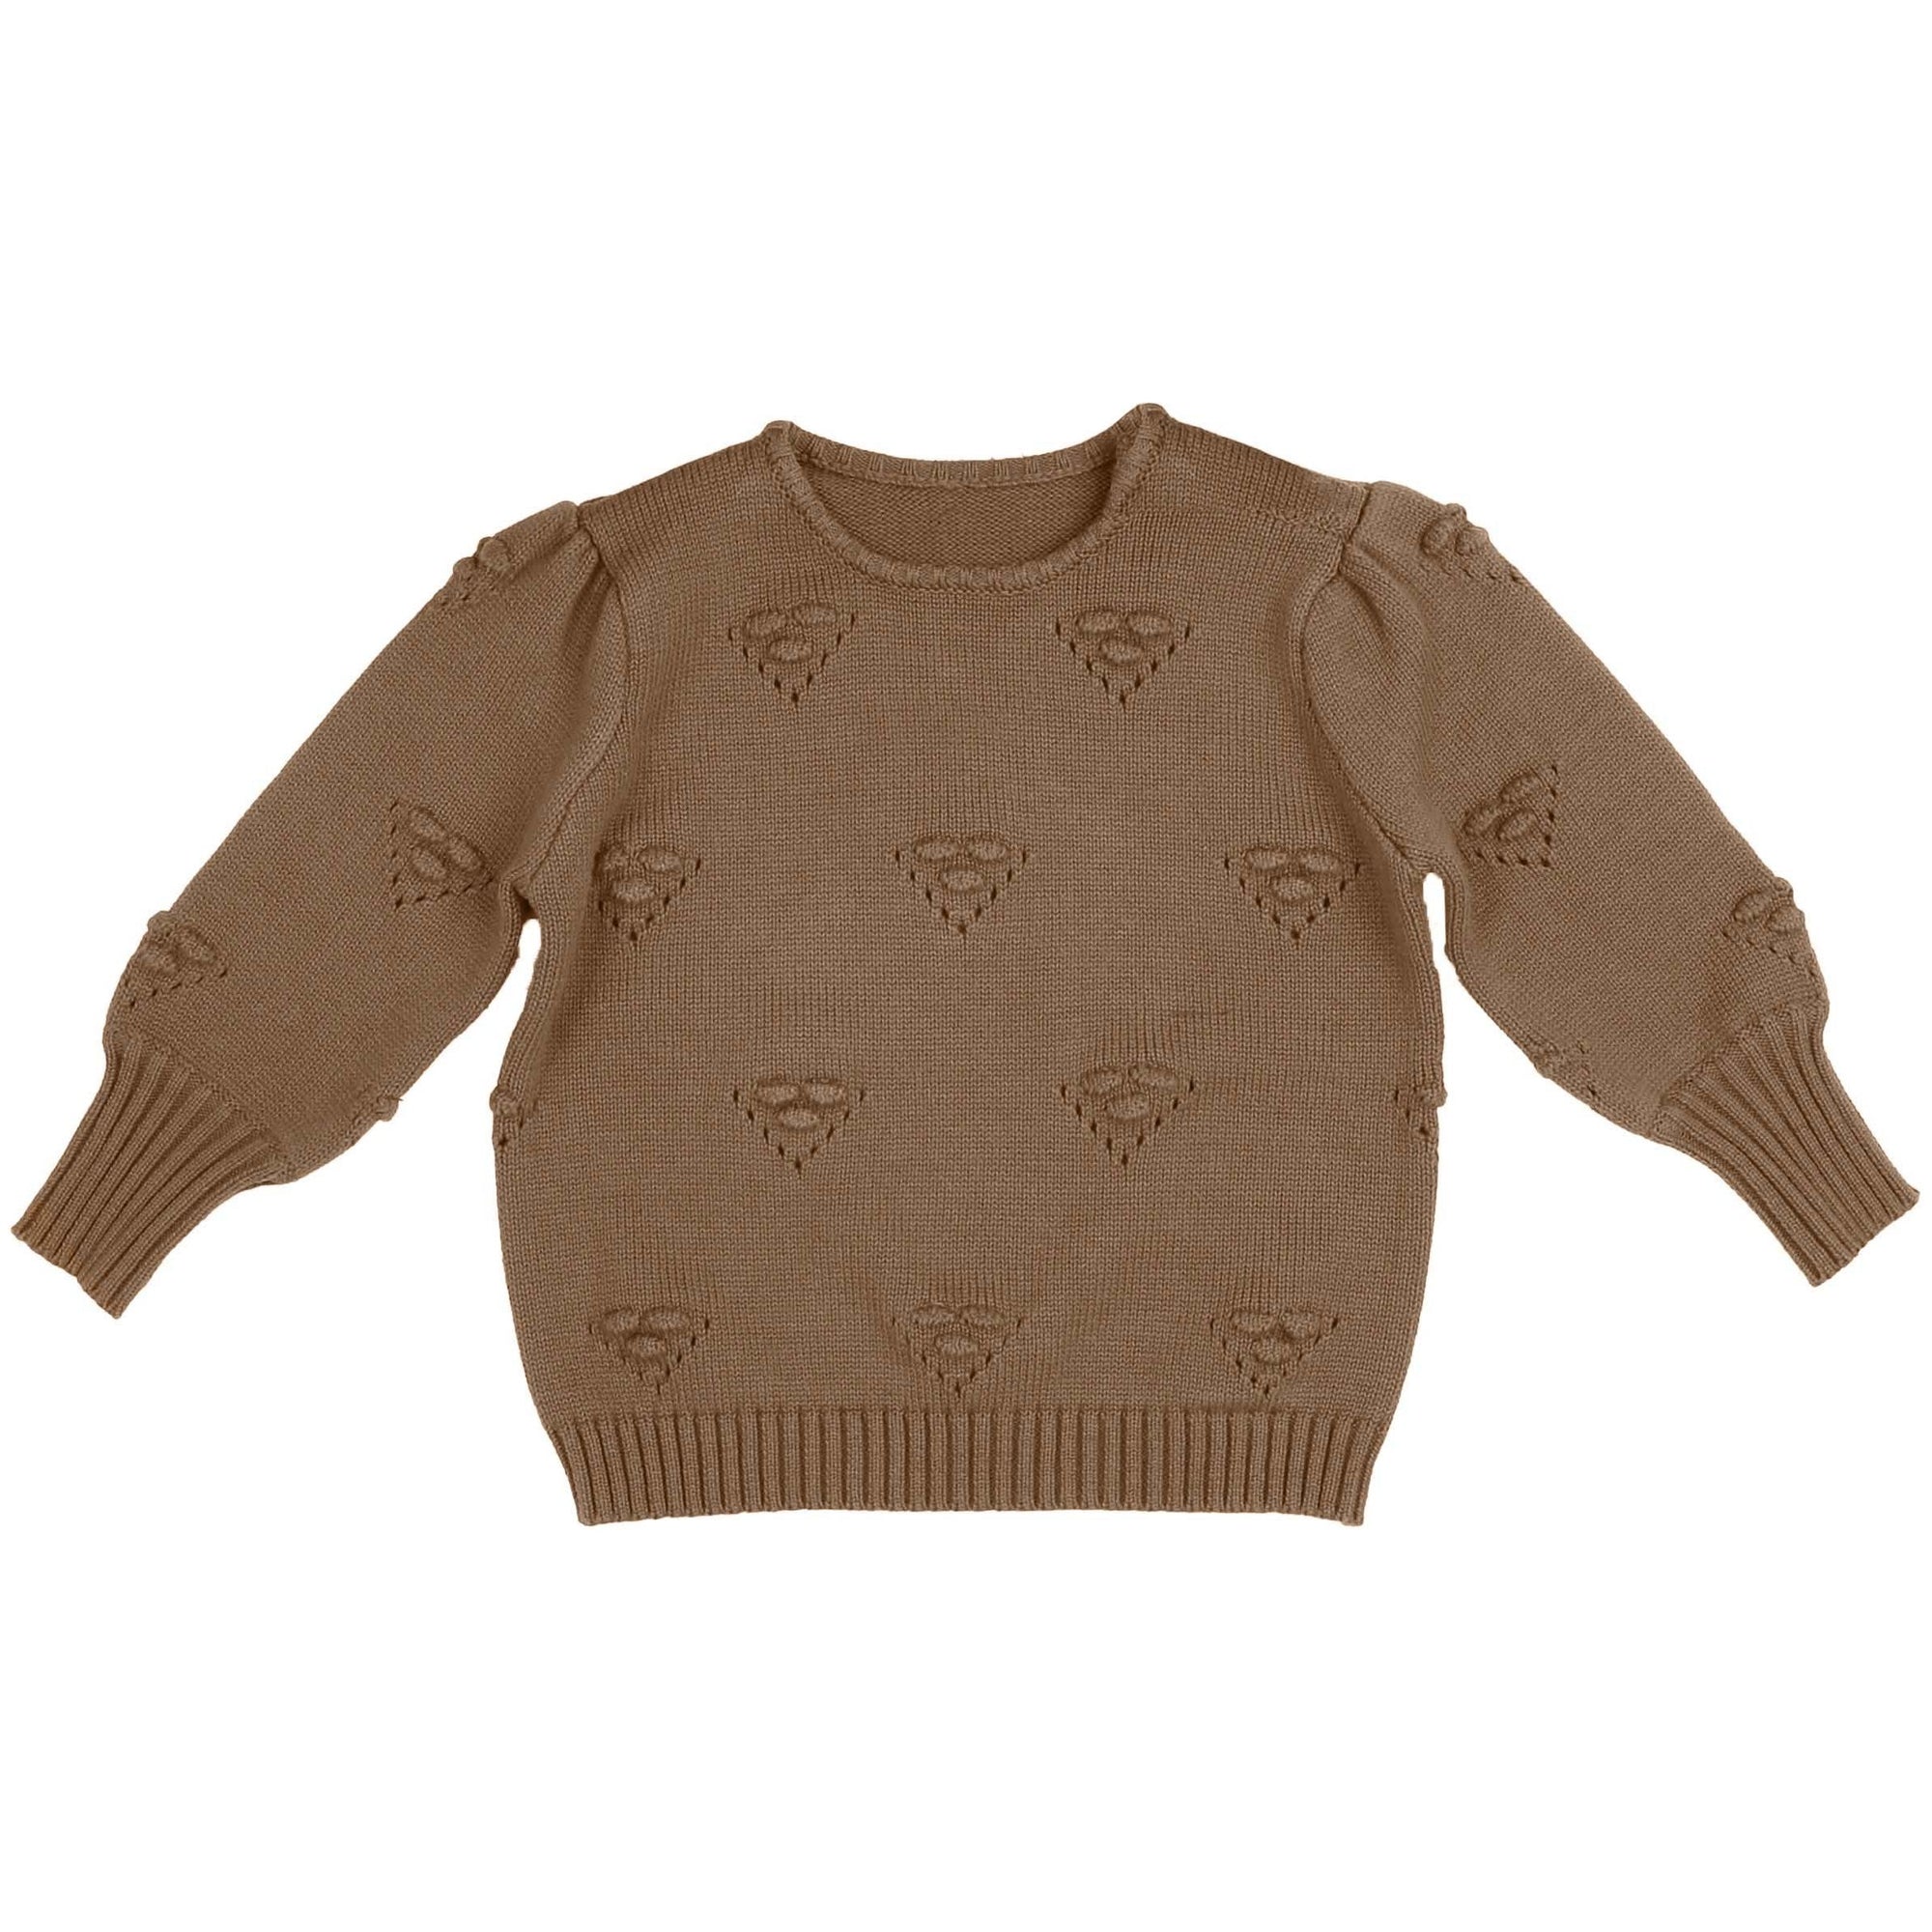 Belati Taupe Bubble Detail Knit Top 3y